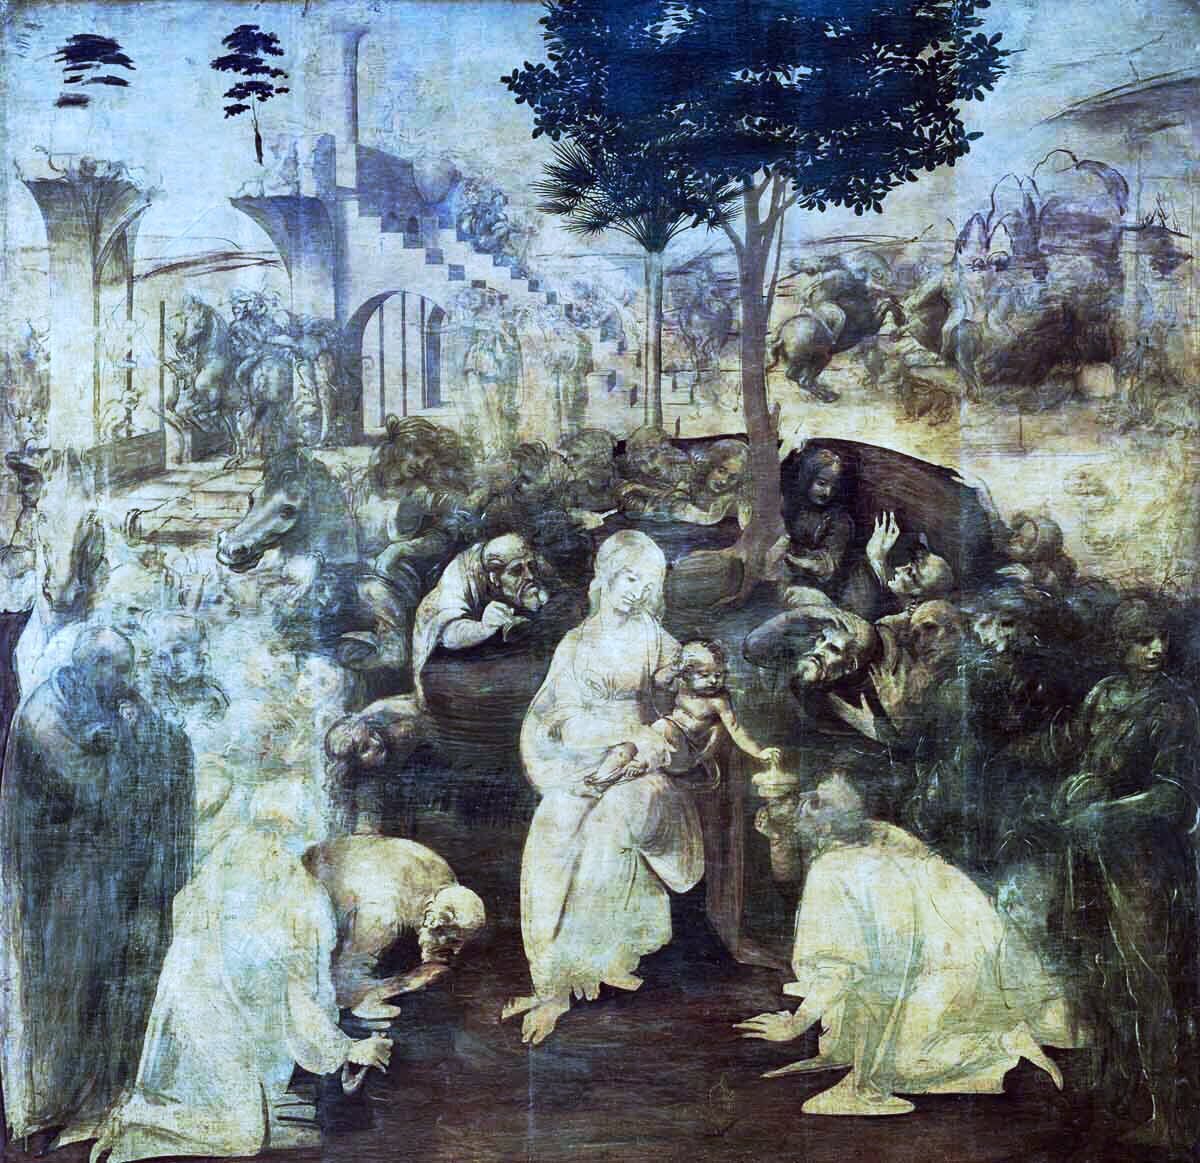 Adoration of the Magi (1481-2) with sketches for the work. He was painstaking when working on an image. Much research was done, sketches made & unique paint created. Such preparation & experimentation meant that works were often unfinished, were lost or completed by others.